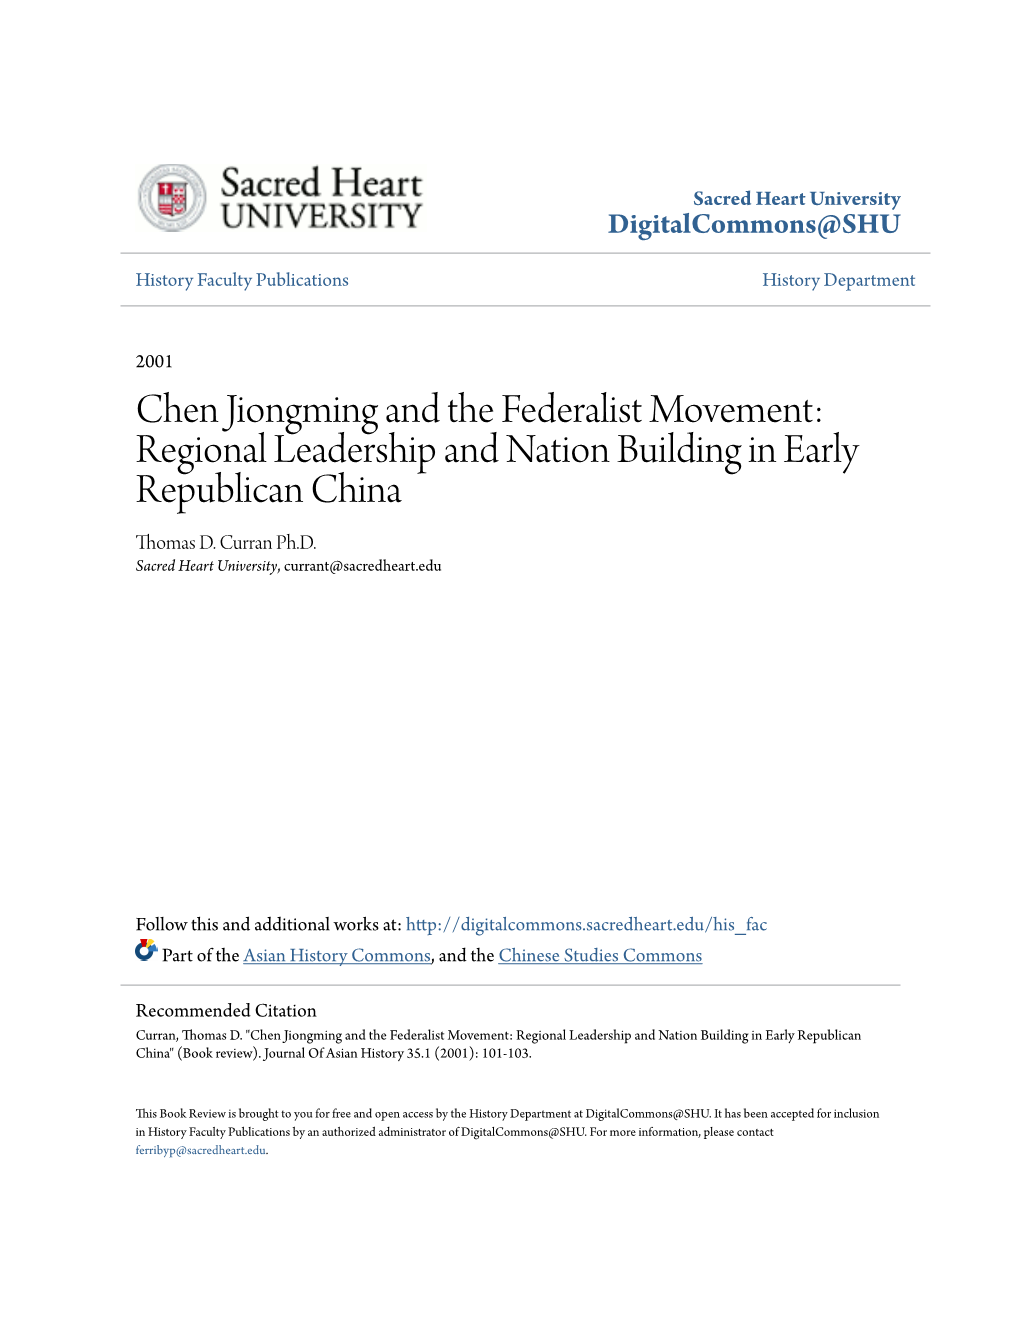 Chen Jiongming and the Federalist Movement: Regional Leadership and Nation Building in Early Republican China Thomas D